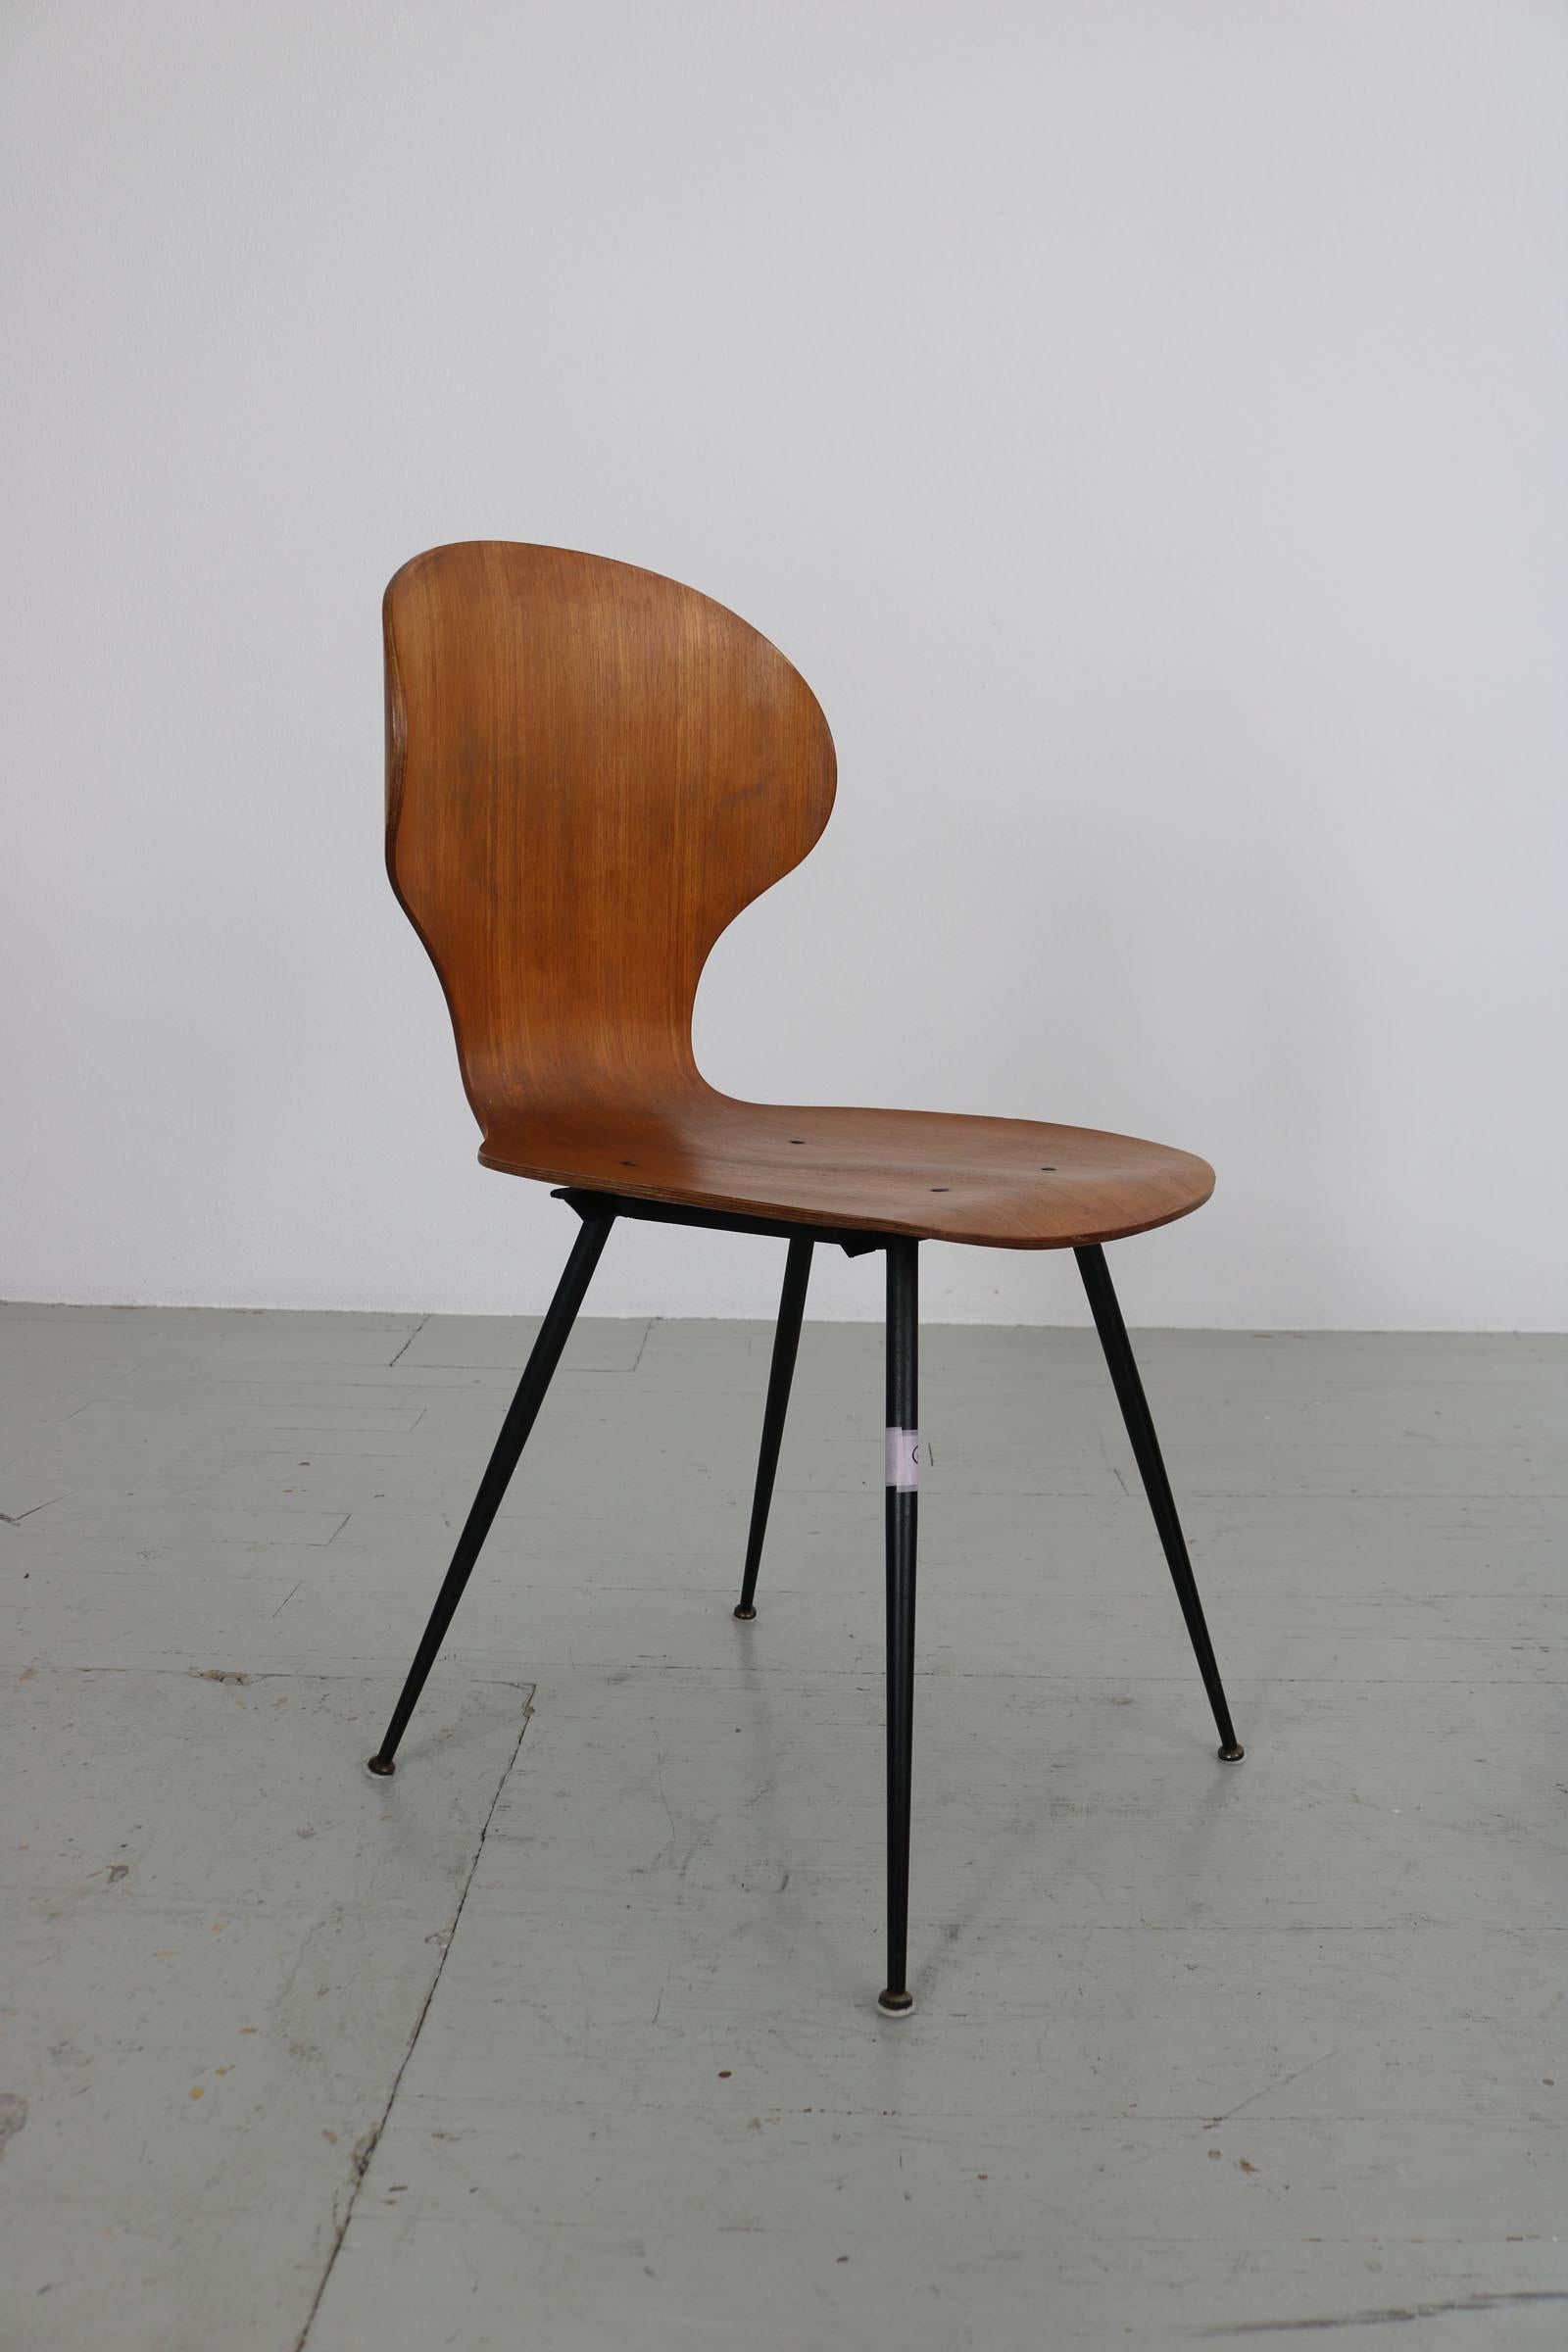 Set of 2 , Carlo Ratti Bentwood Chairs, Italy, 1950s by Industria Legni Curvati  For Sale 2